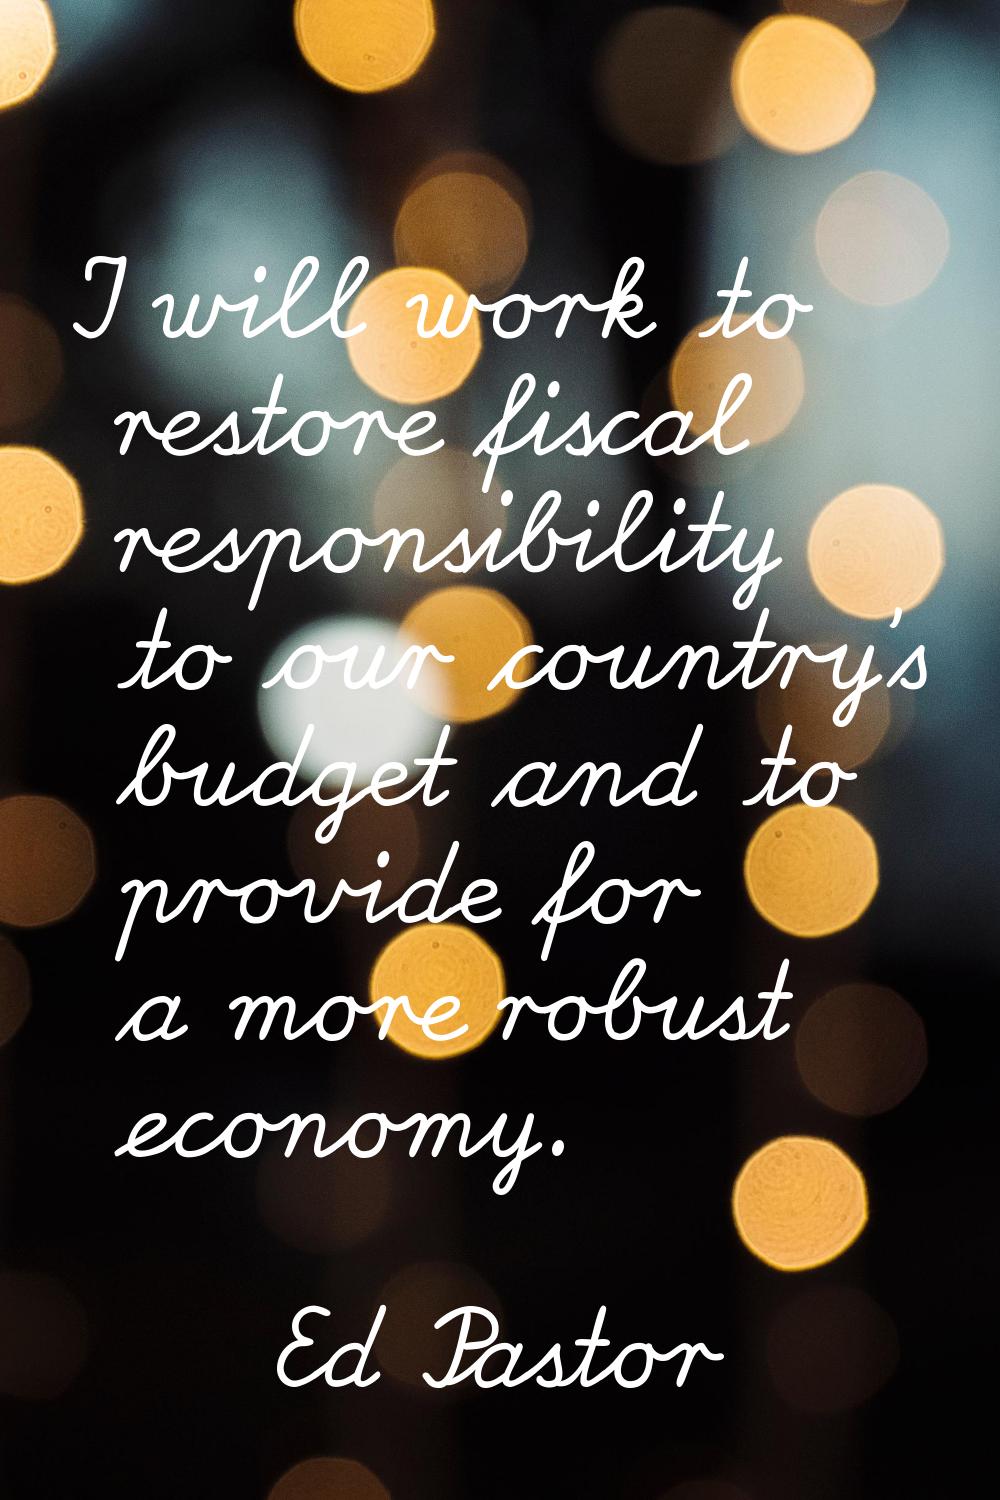 I will work to restore fiscal responsibility to our country's budget and to provide for a more robu